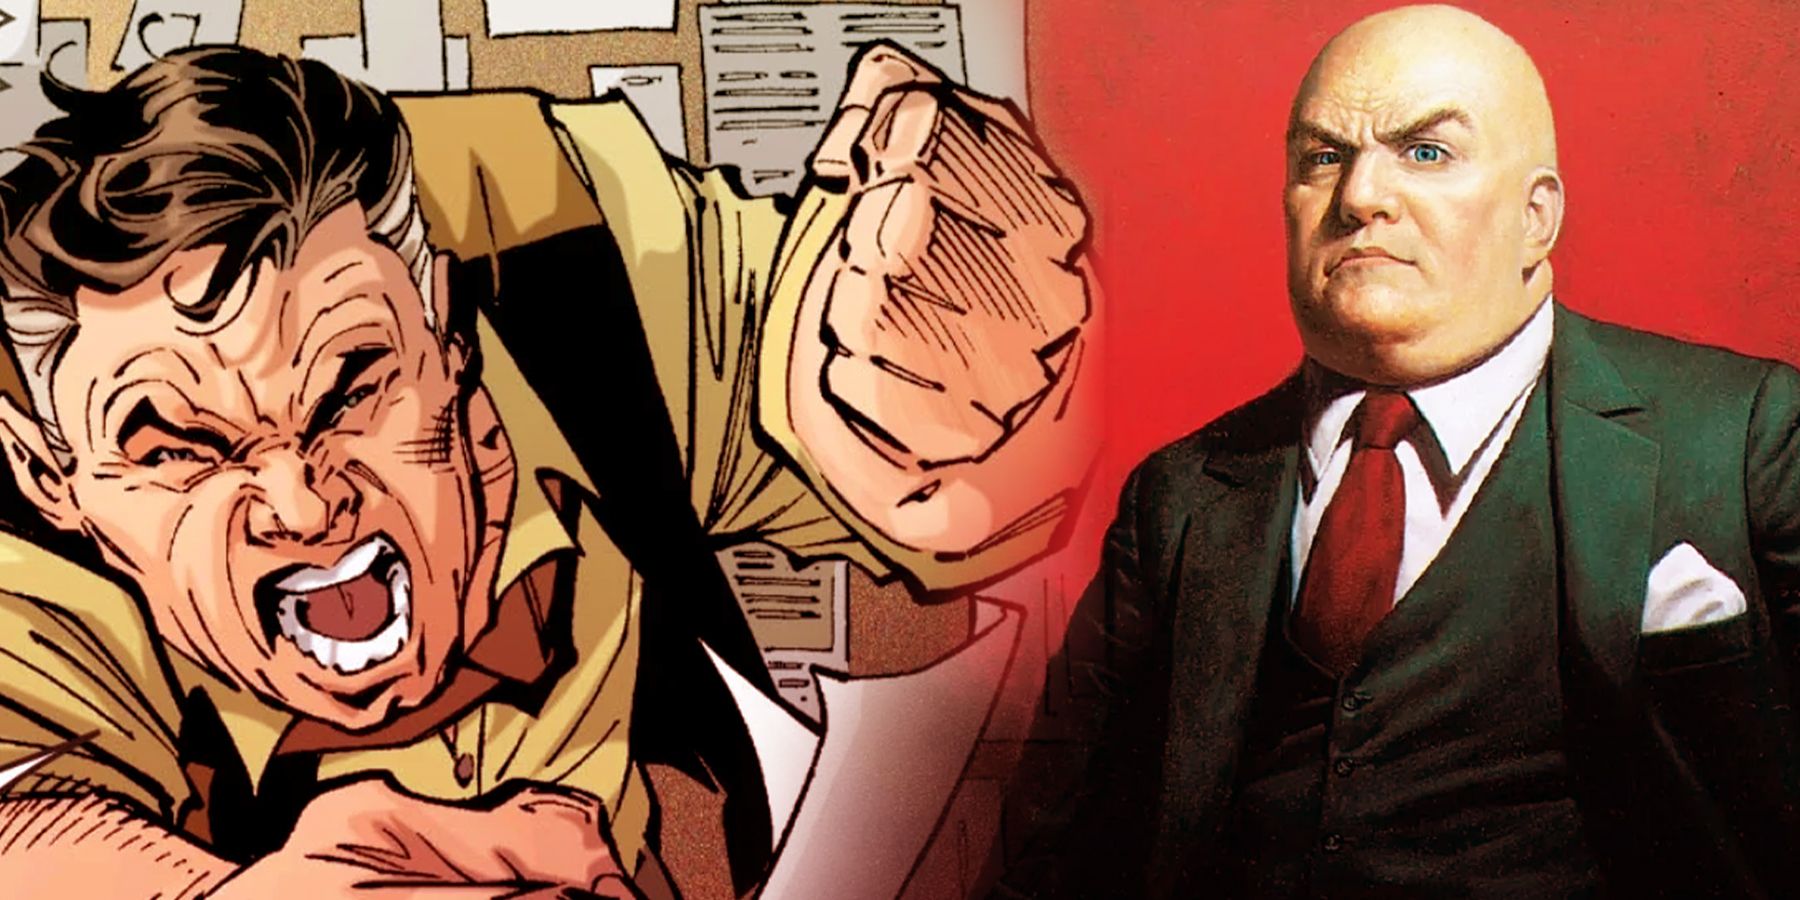 Lex Luthor and Perry White of DC Comics